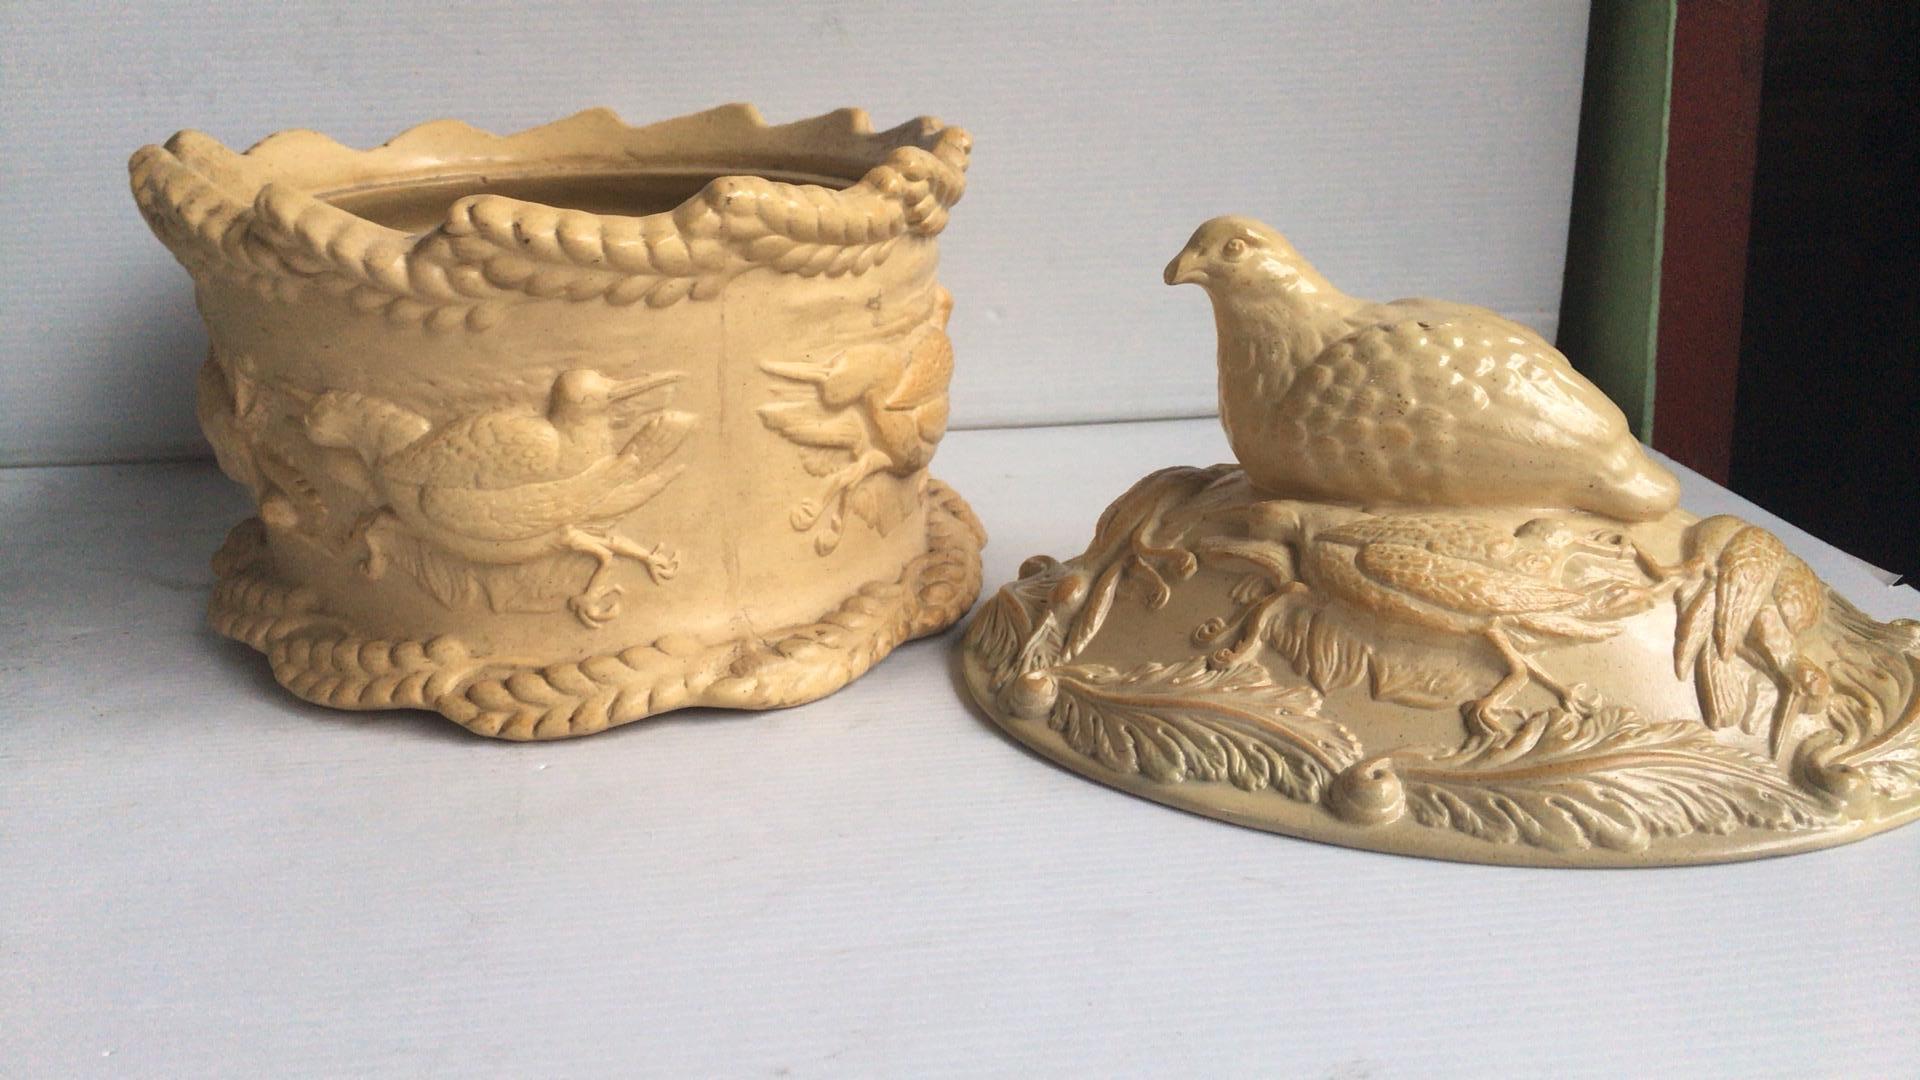 Rare 19th century English Caneware game pie, circa 1830.
A large partridge on the lid, decorated with ear of wheat and woodcocks.